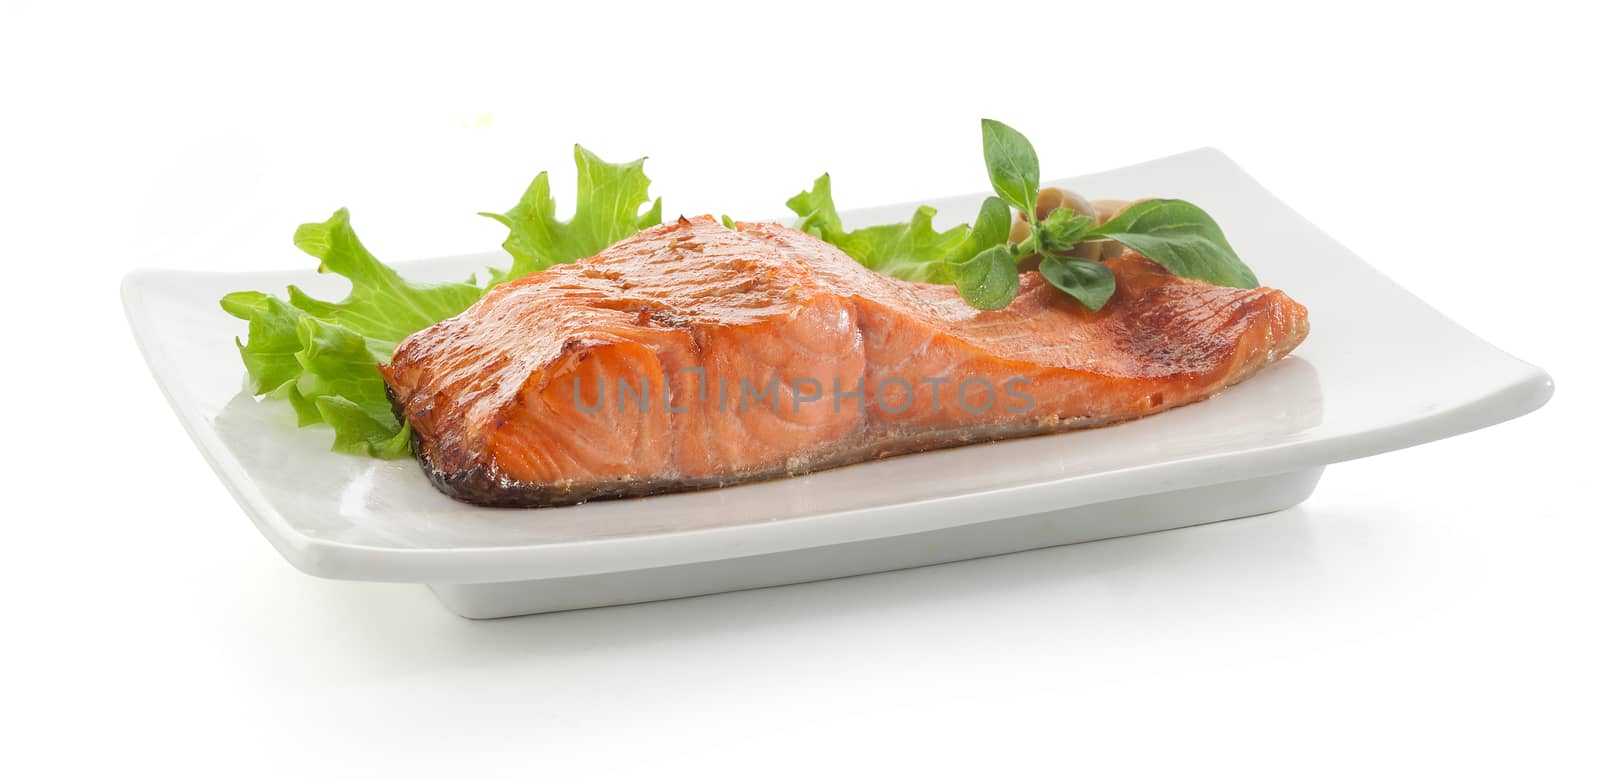 Baked fillet of trout with lettuce and basil by Angorius